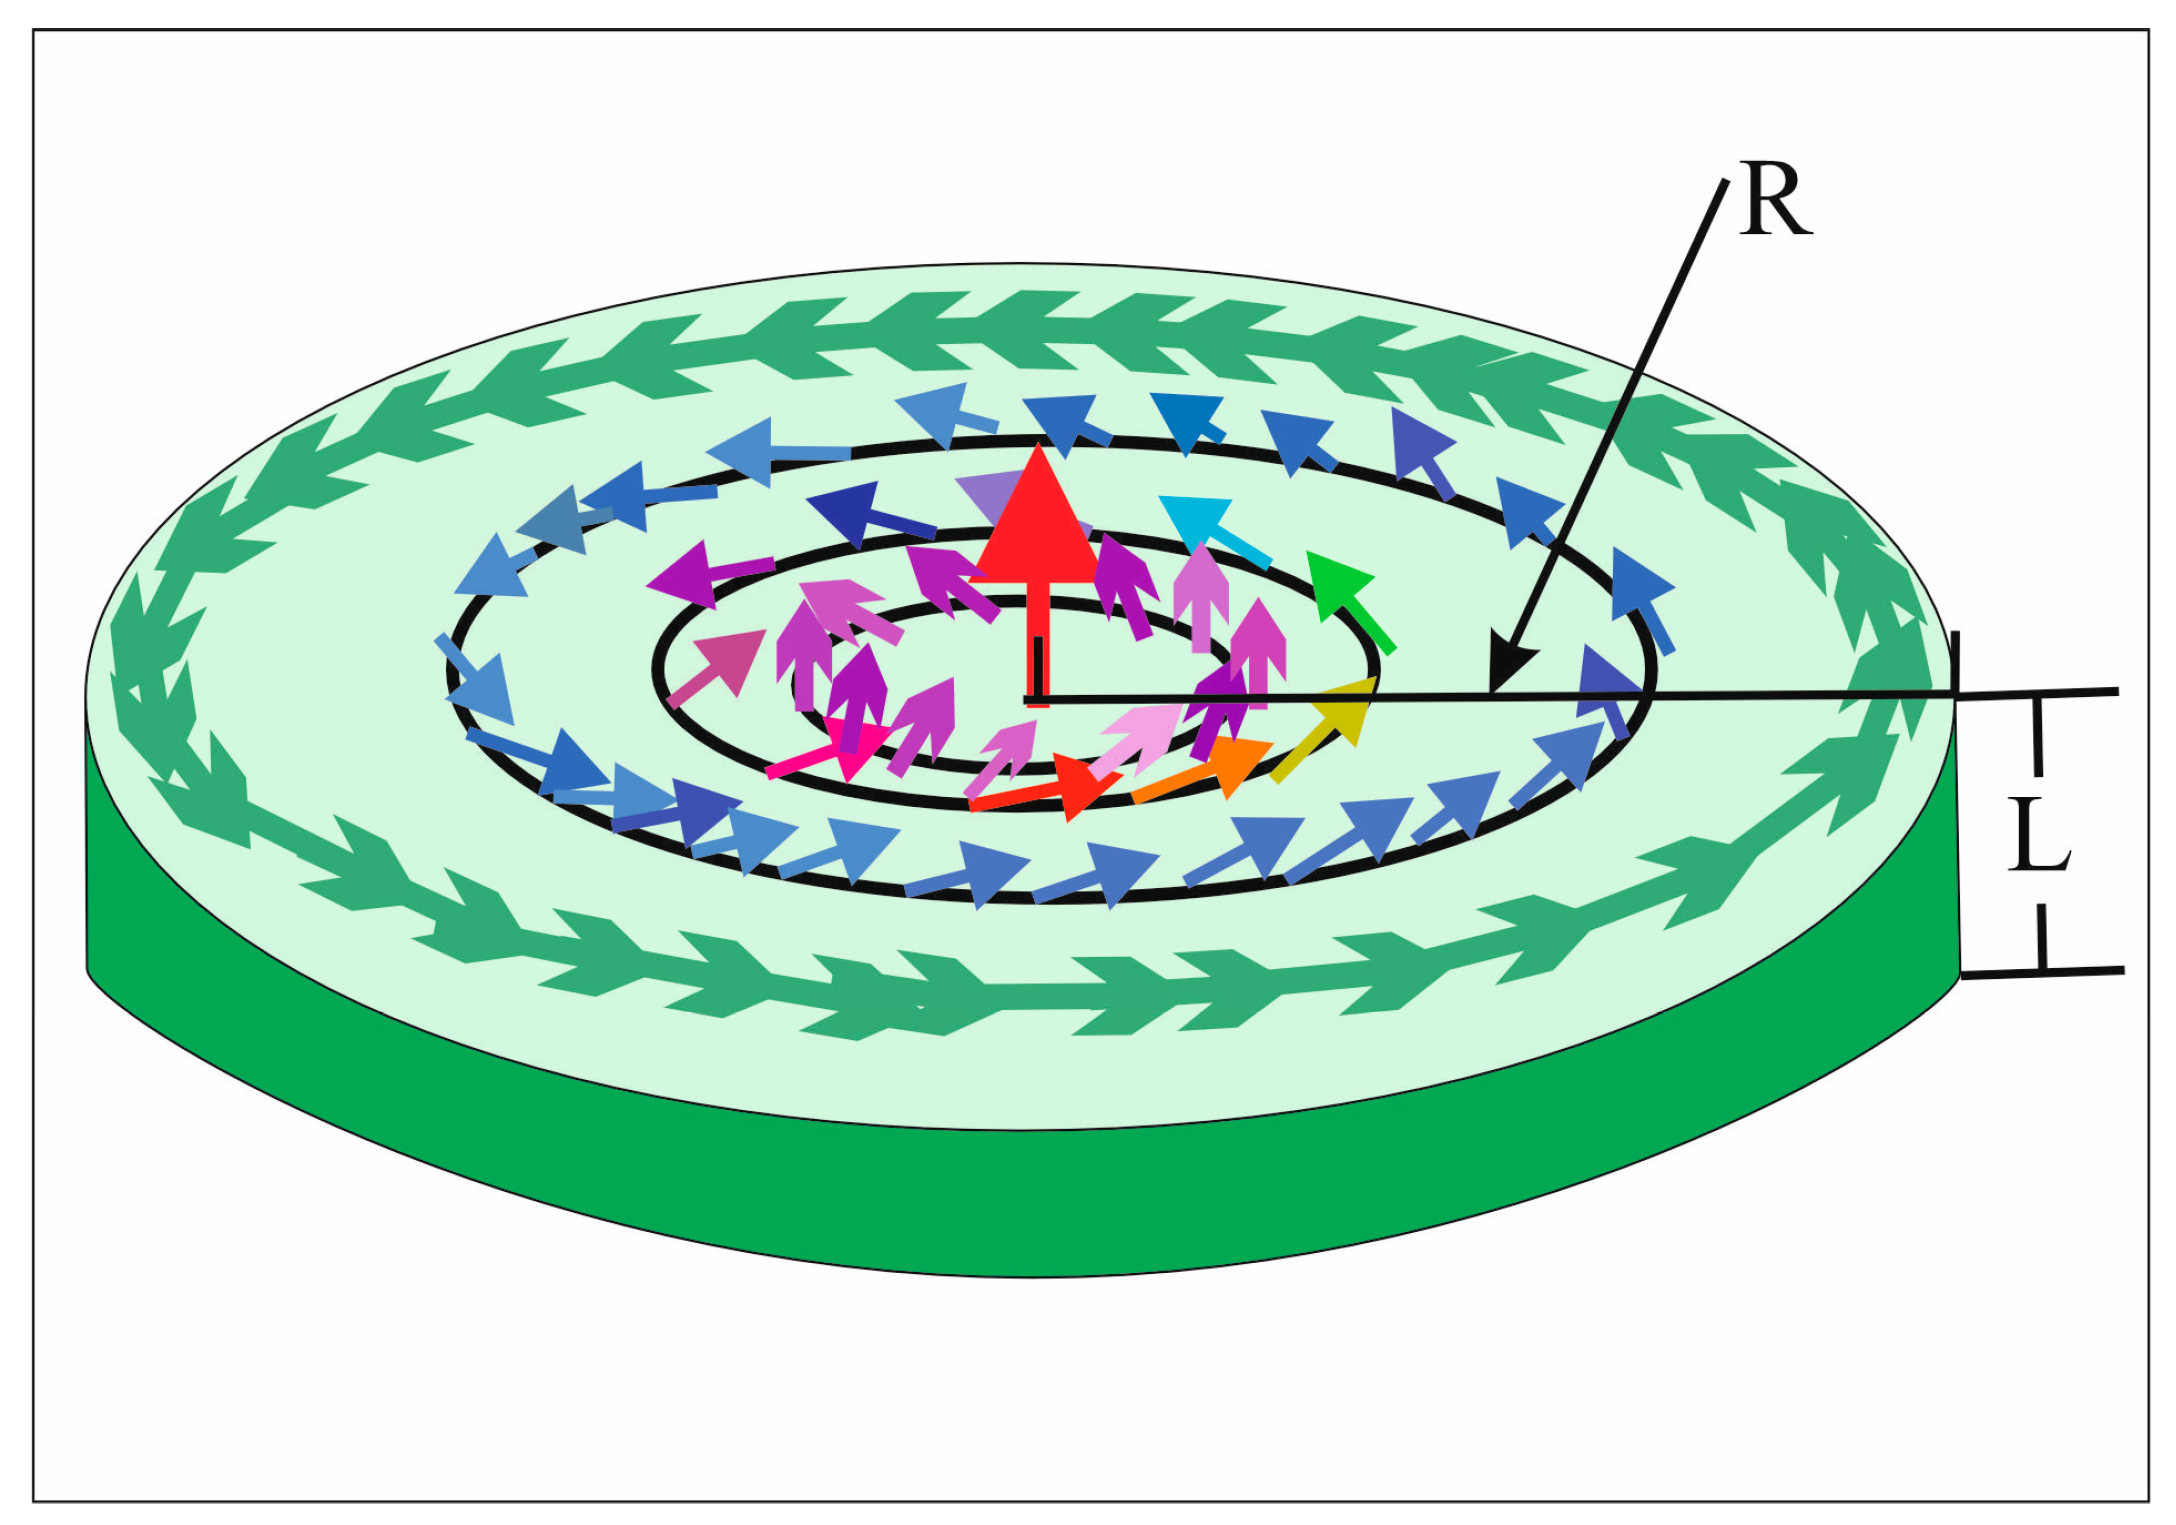 Electric Field‐Driven Rotation of Magnetic Vortex Originating from